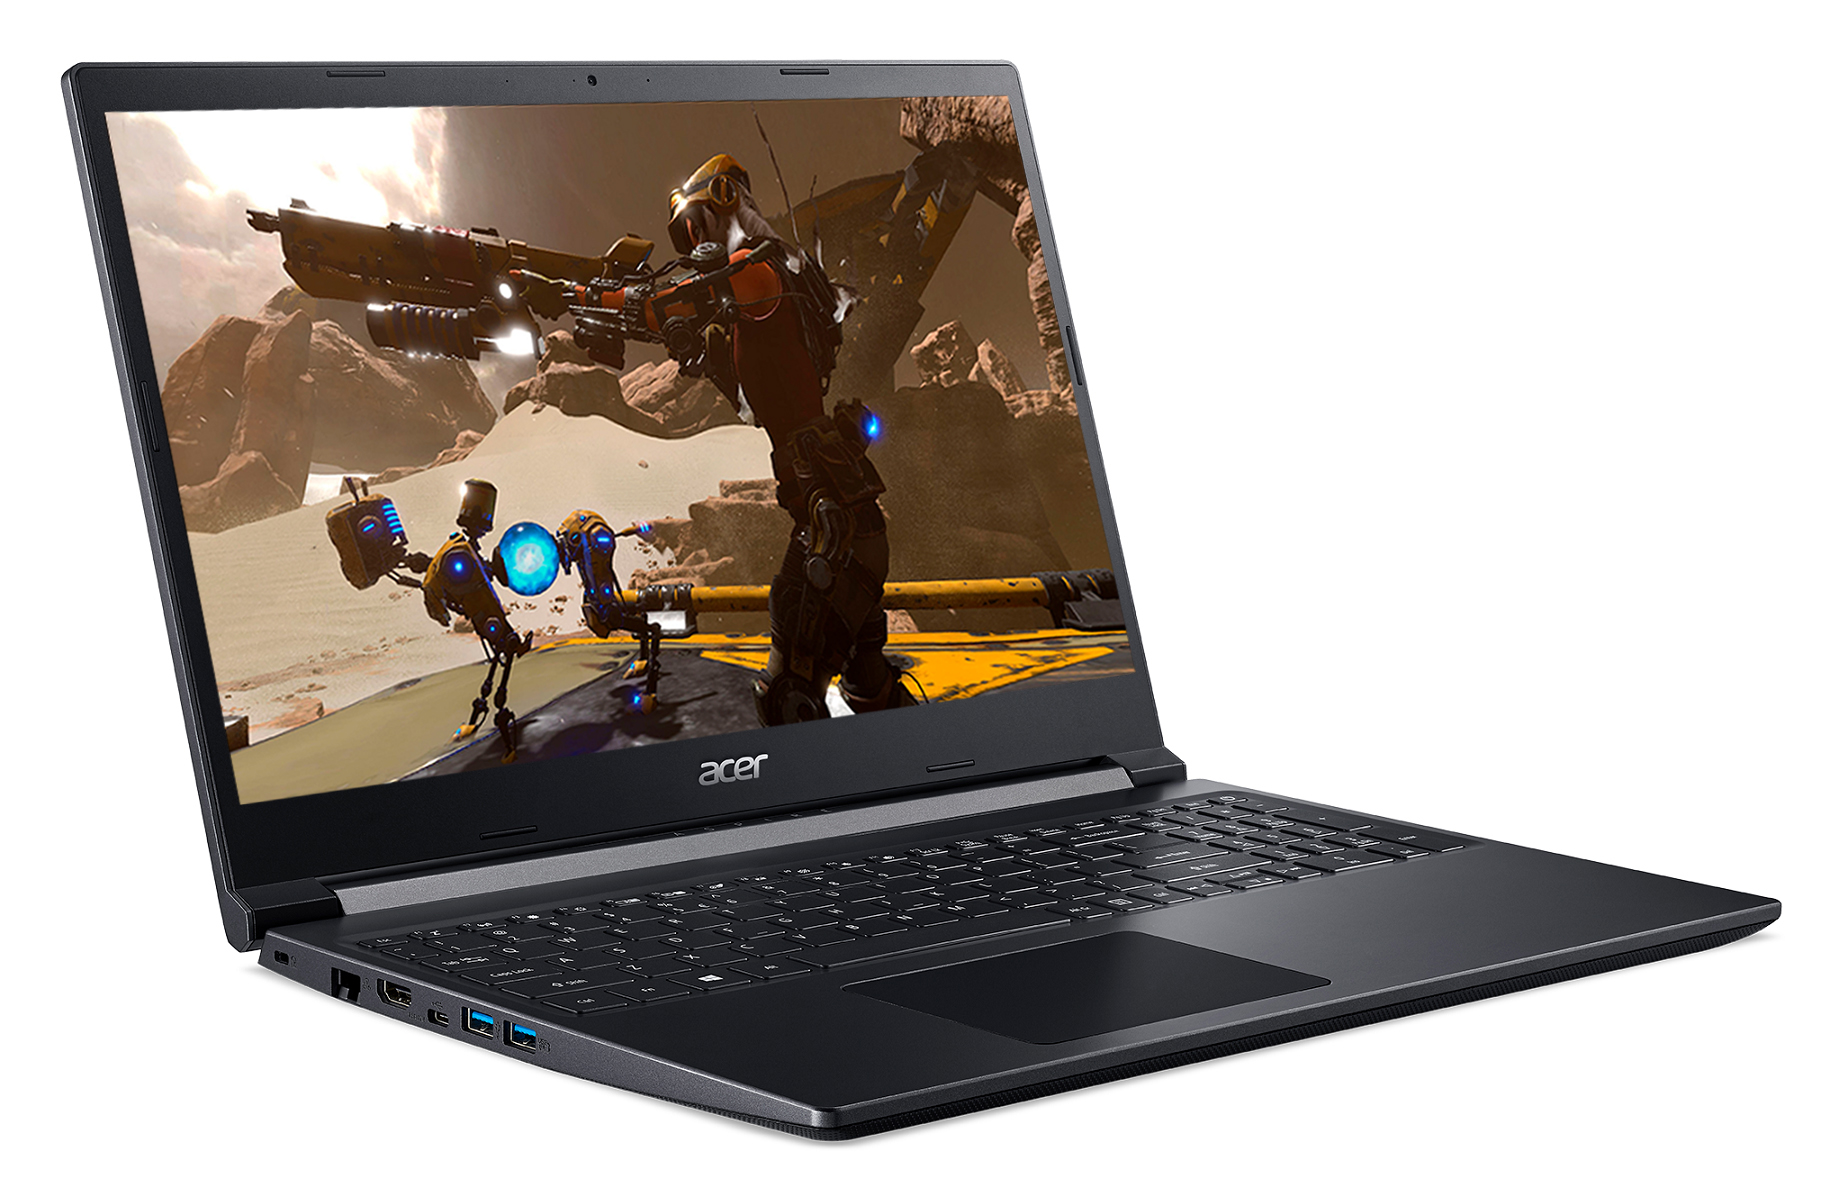 acer-launches-acer-aspire-7-gaming-laptop